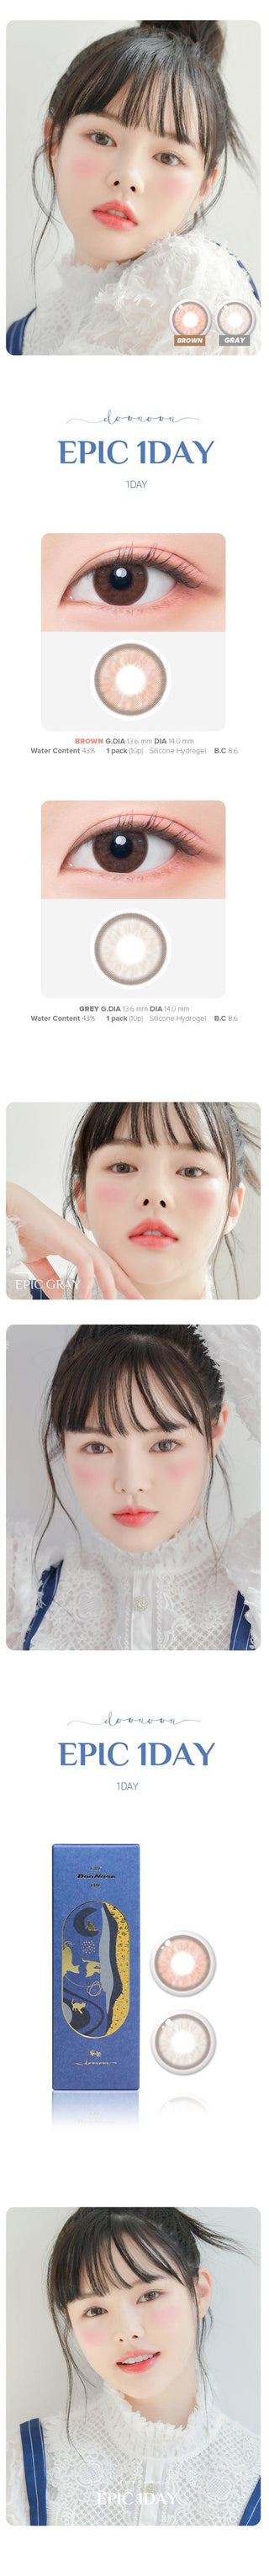 Variety of DooNoon Epic 1-Day Brown (10pk) contact lens colors displayed, with closeups of an eye wearing the contact lens colors, and with a model wearing the contact lens colors showing realistic eye-enlarging effect from various angles.